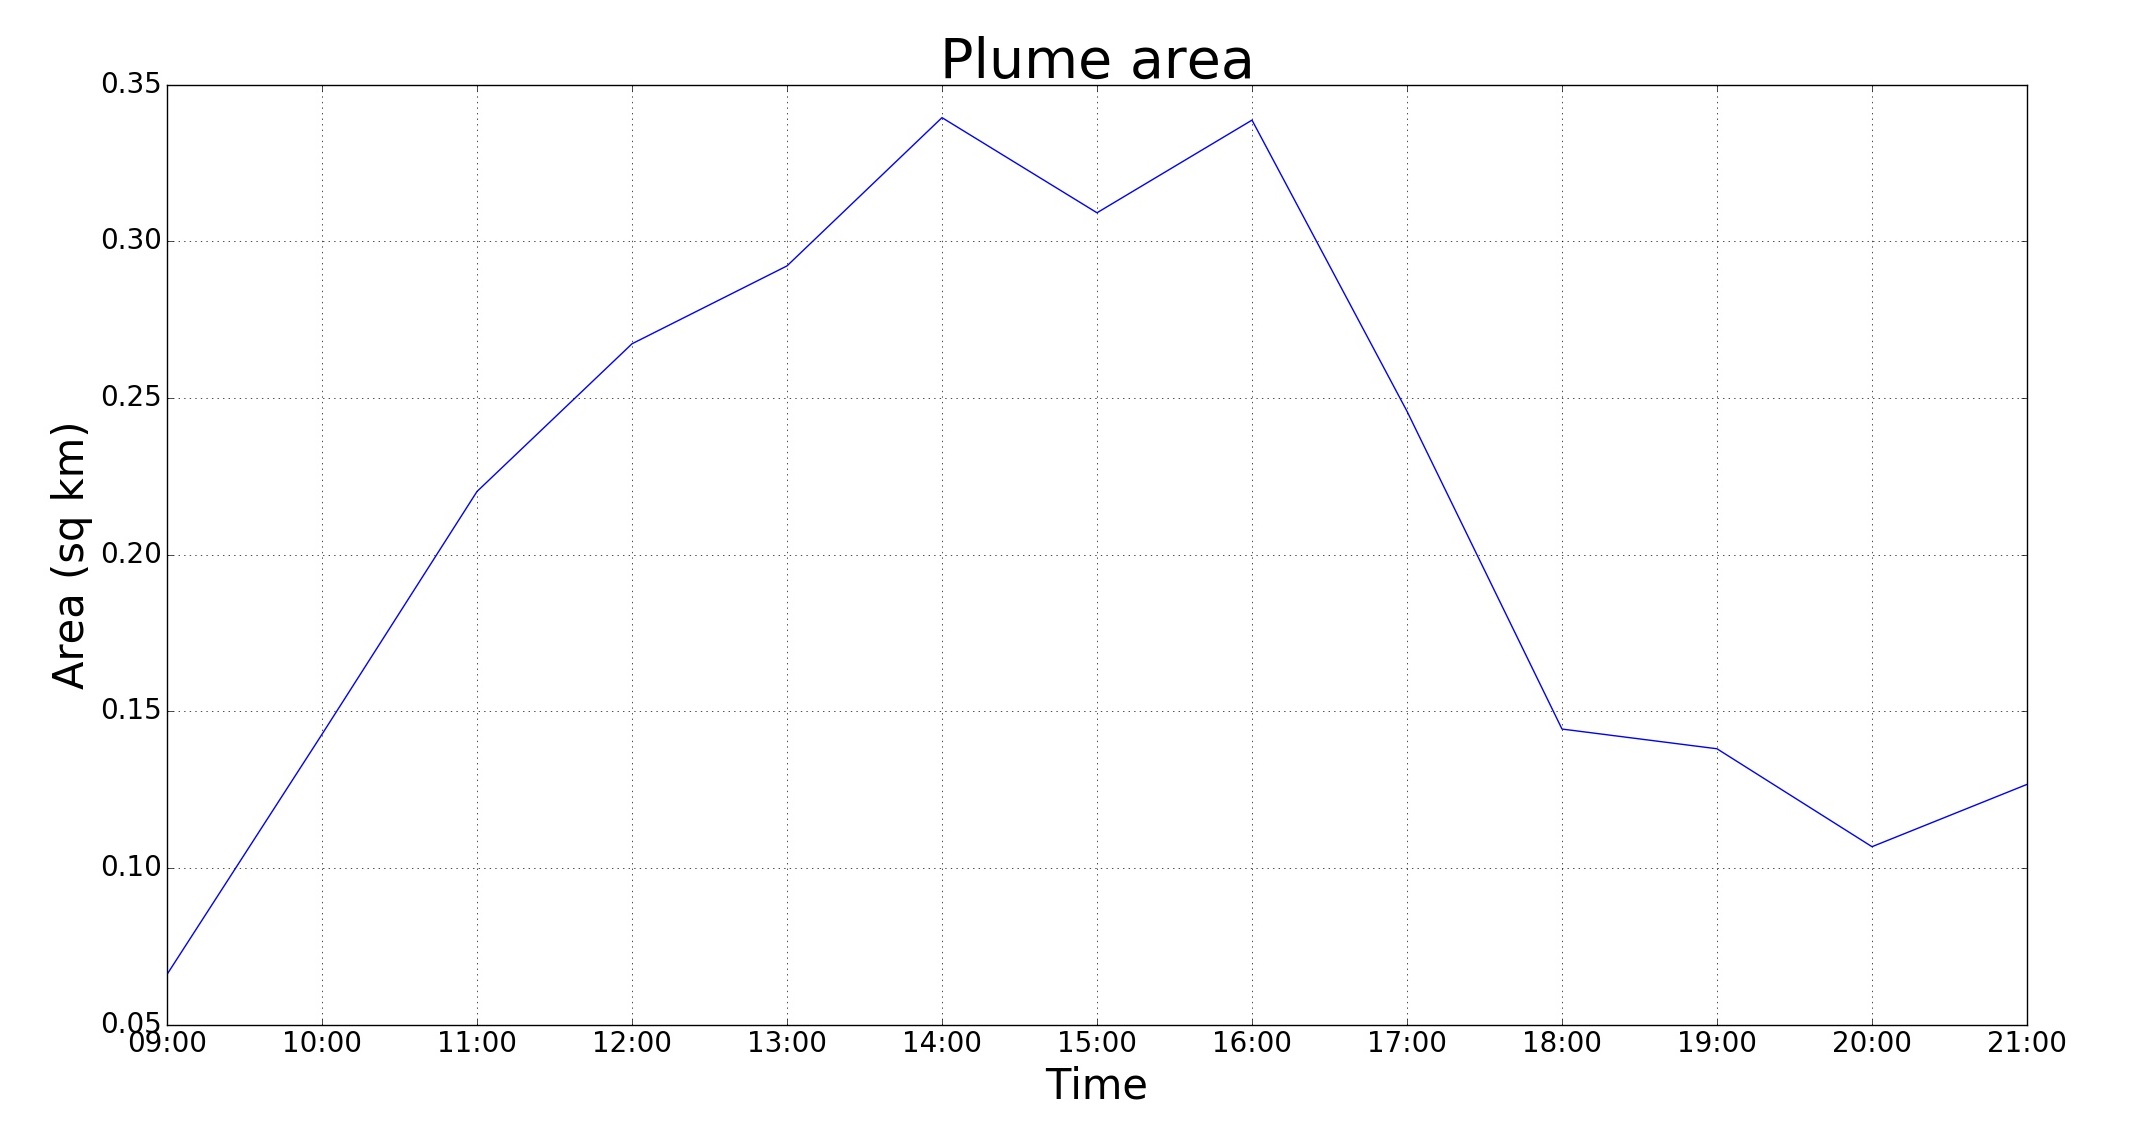 Graph showing plume extent over the course of a twelve-hour period in the summer melt season at Kronebreen glacier, Svalbard.